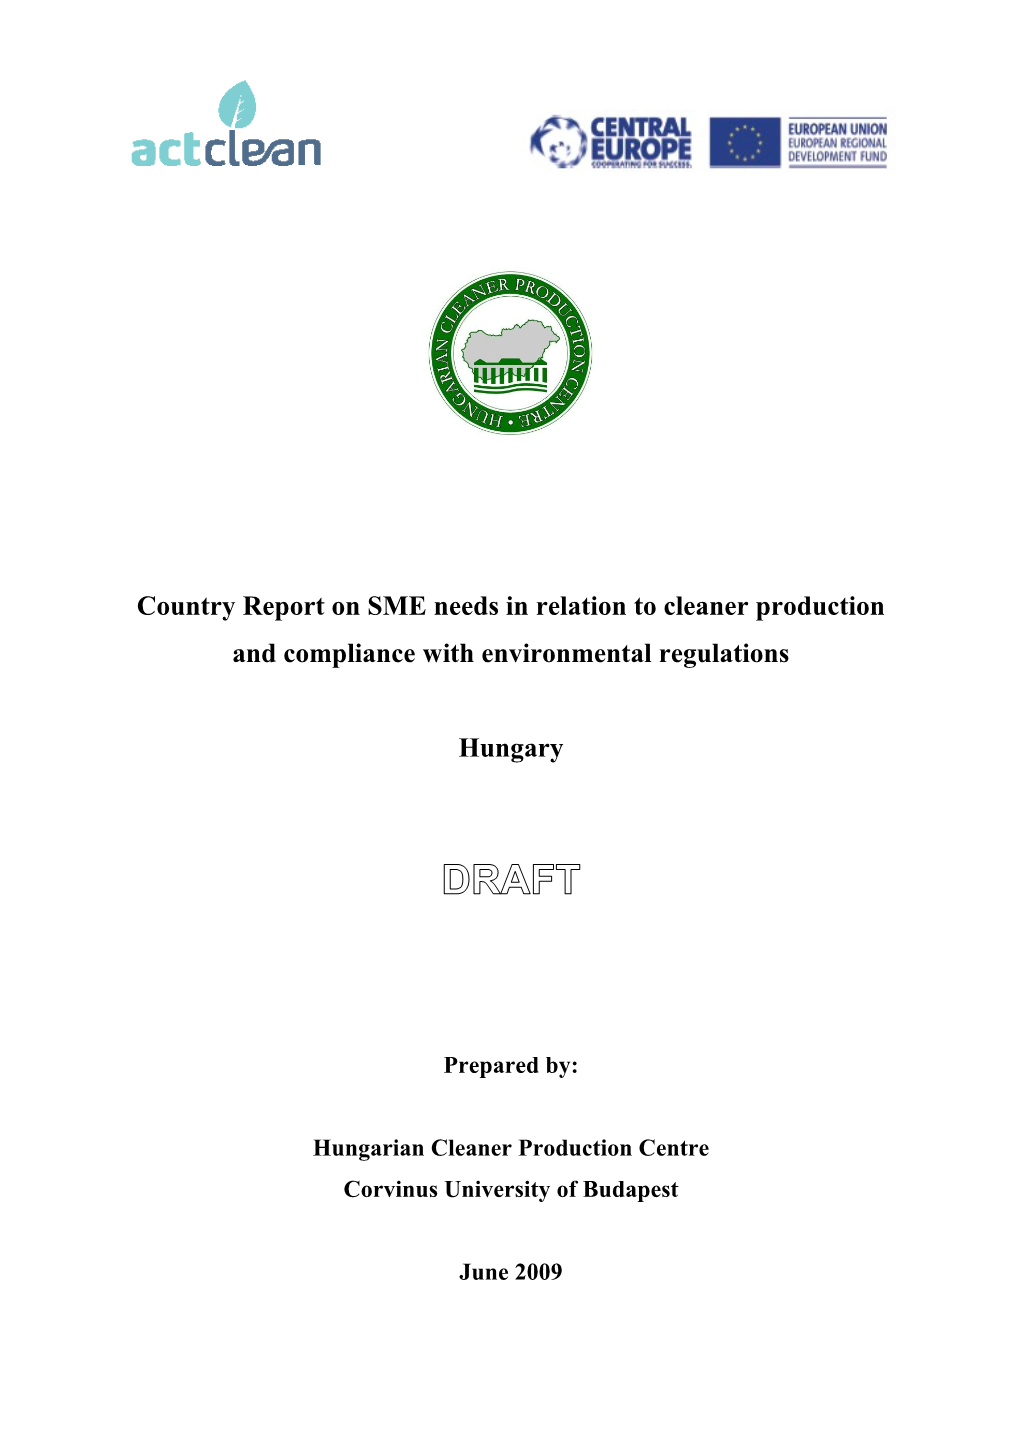 Country Report on SME Needs in Relation to Cleaner Production and Compliance with Environmental